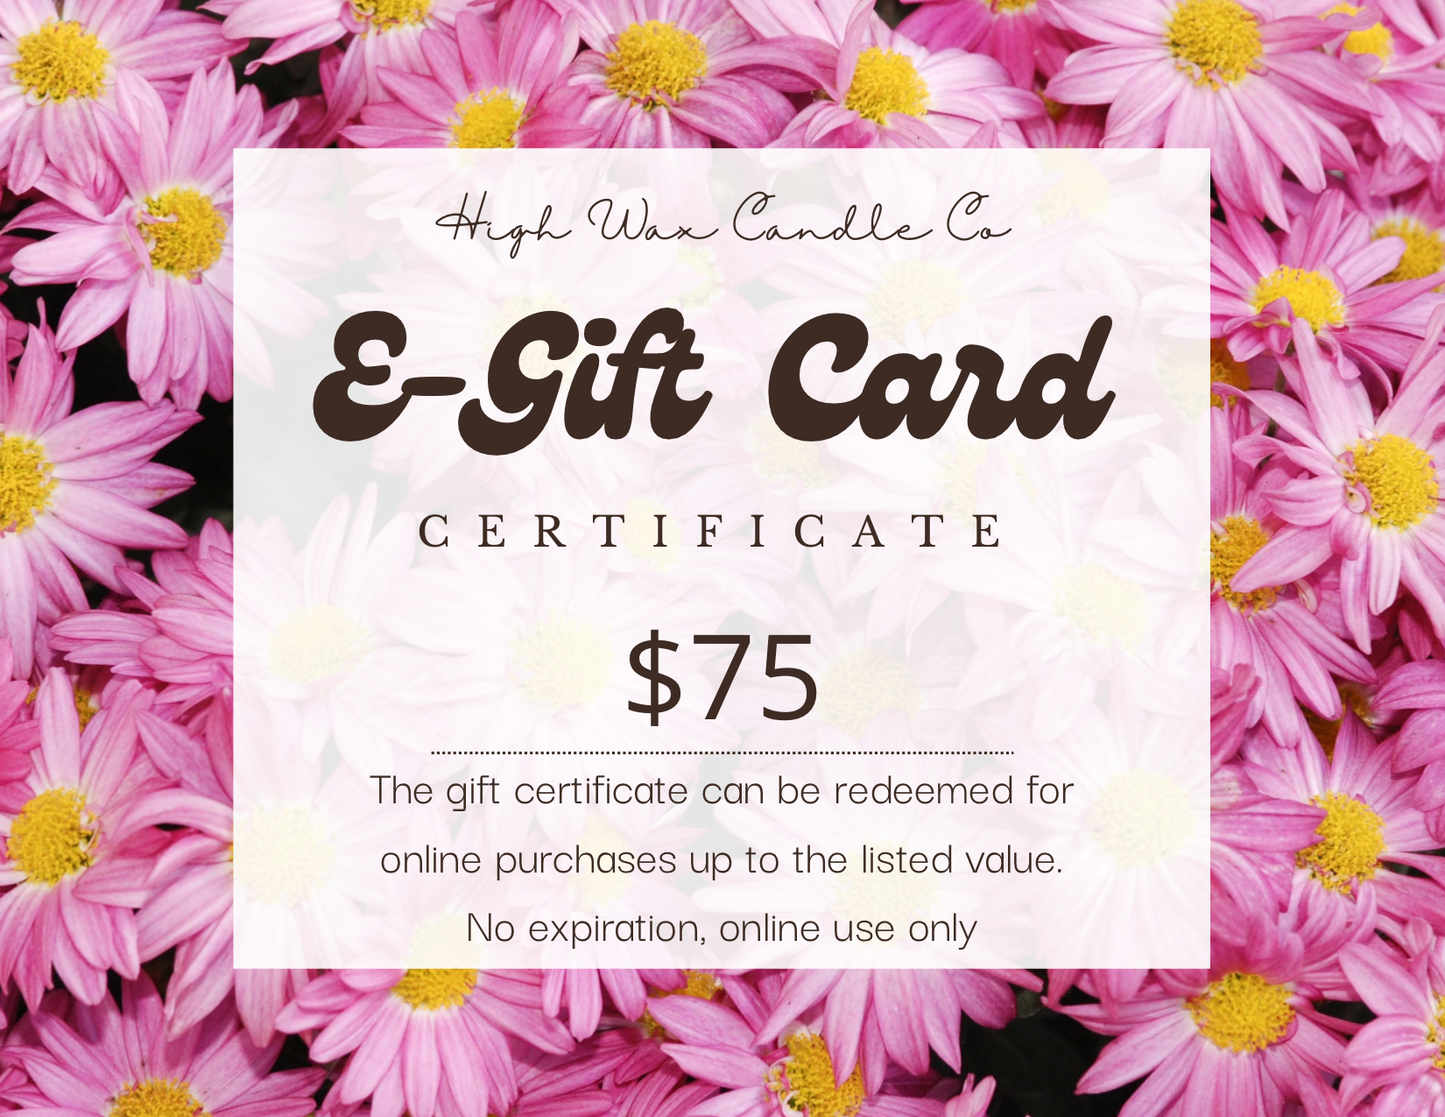 Gift Cards - Online only